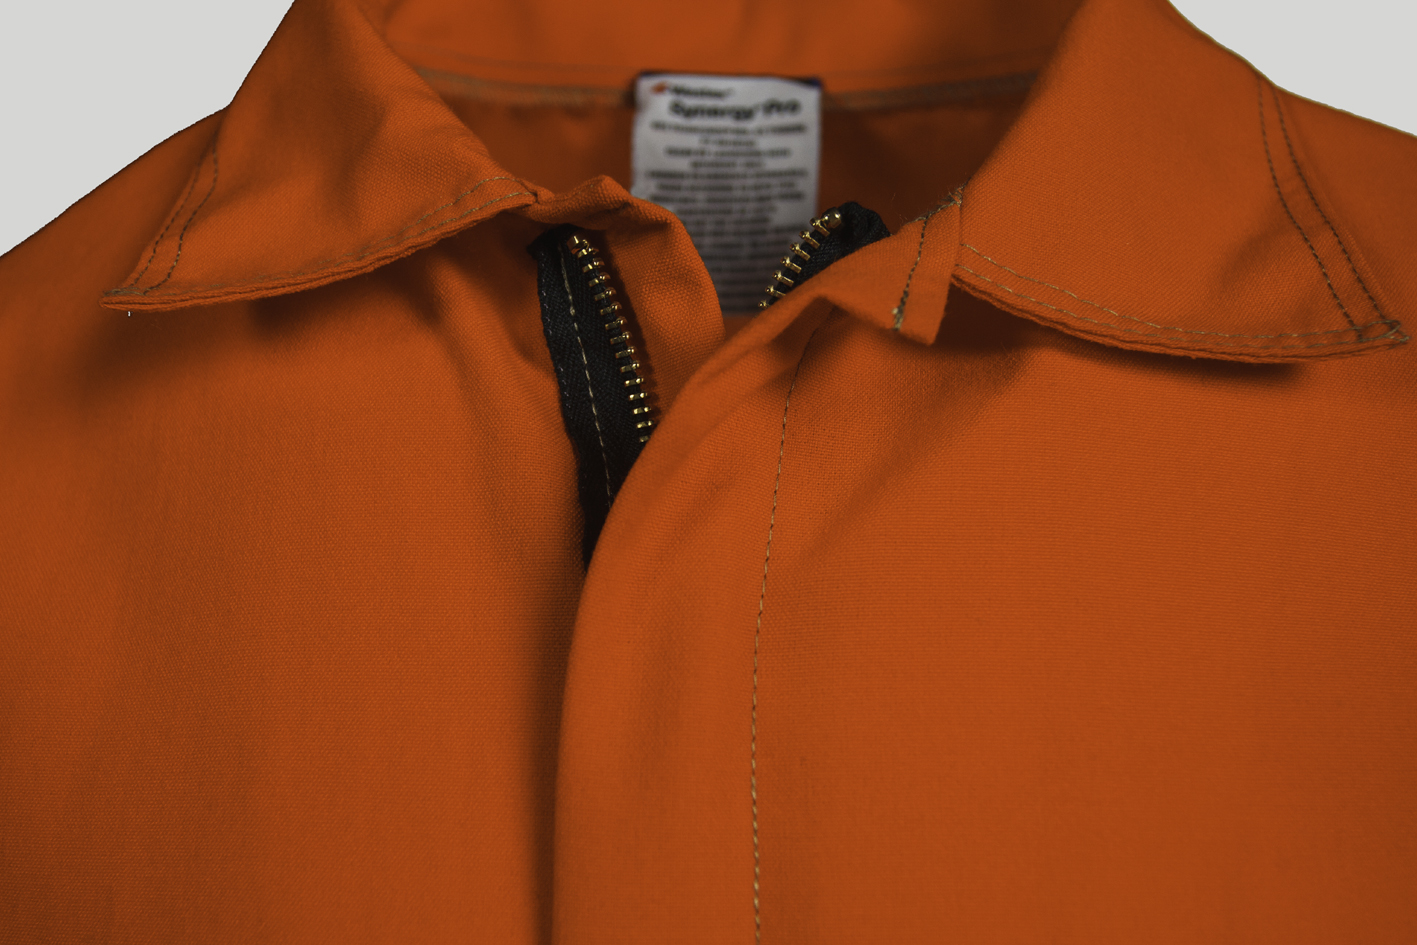 Aramid-based Synergy Pro fabrics for industrial workers don’t inherently burn. © Milliken